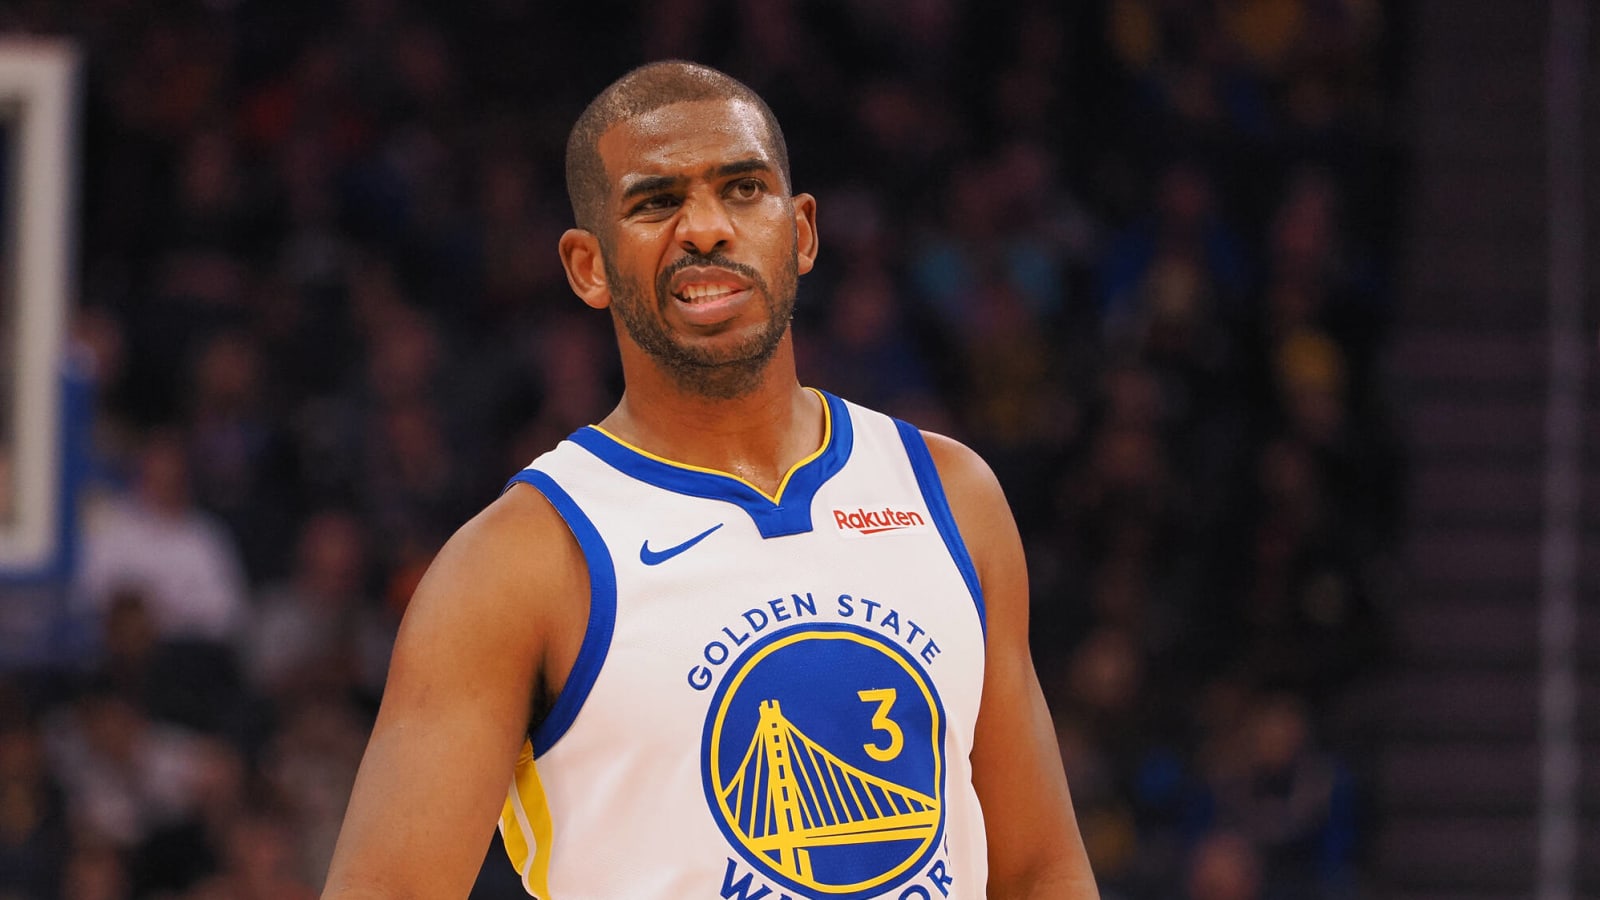 Chris Paul shares photo of injured hand after undergoing surgery